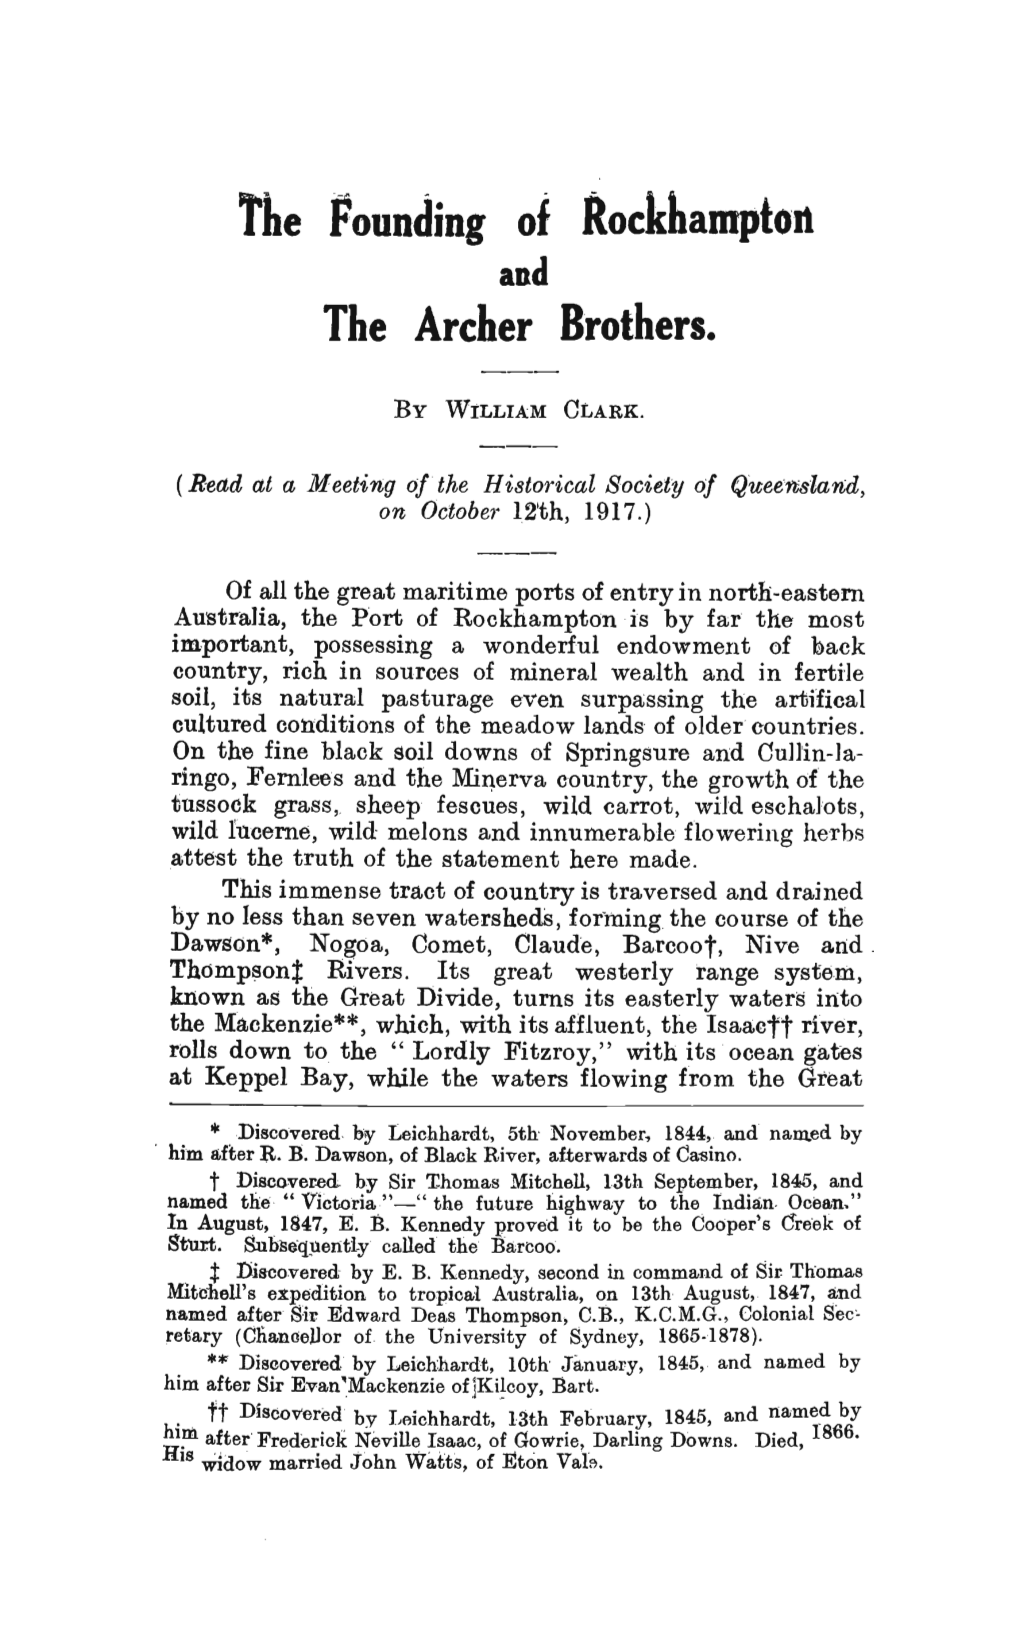 The Pounding of Rockhampton the Archer Brothers